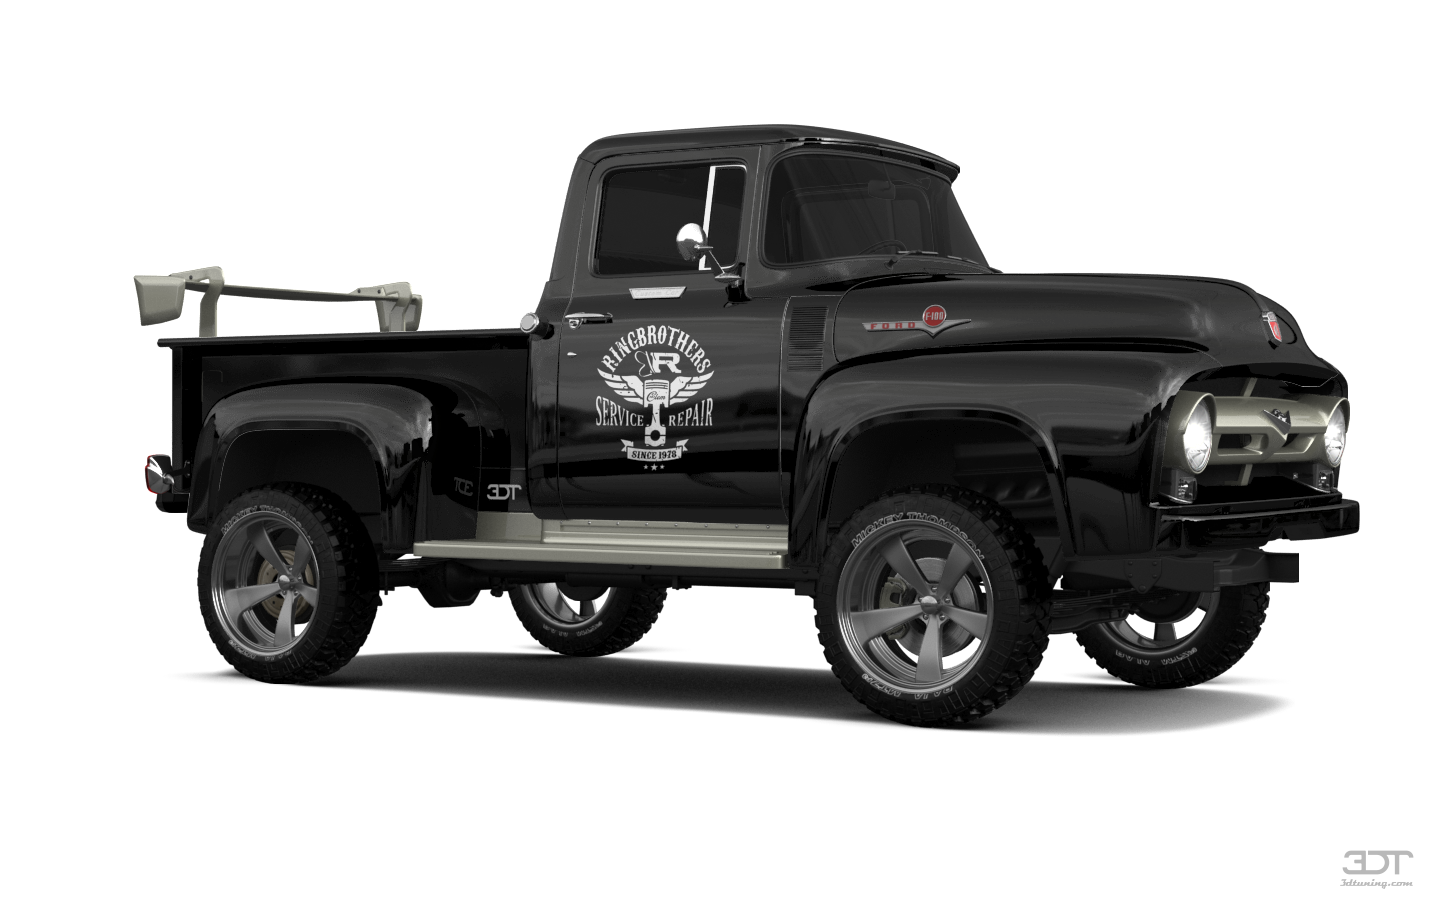 Ford F-100'56